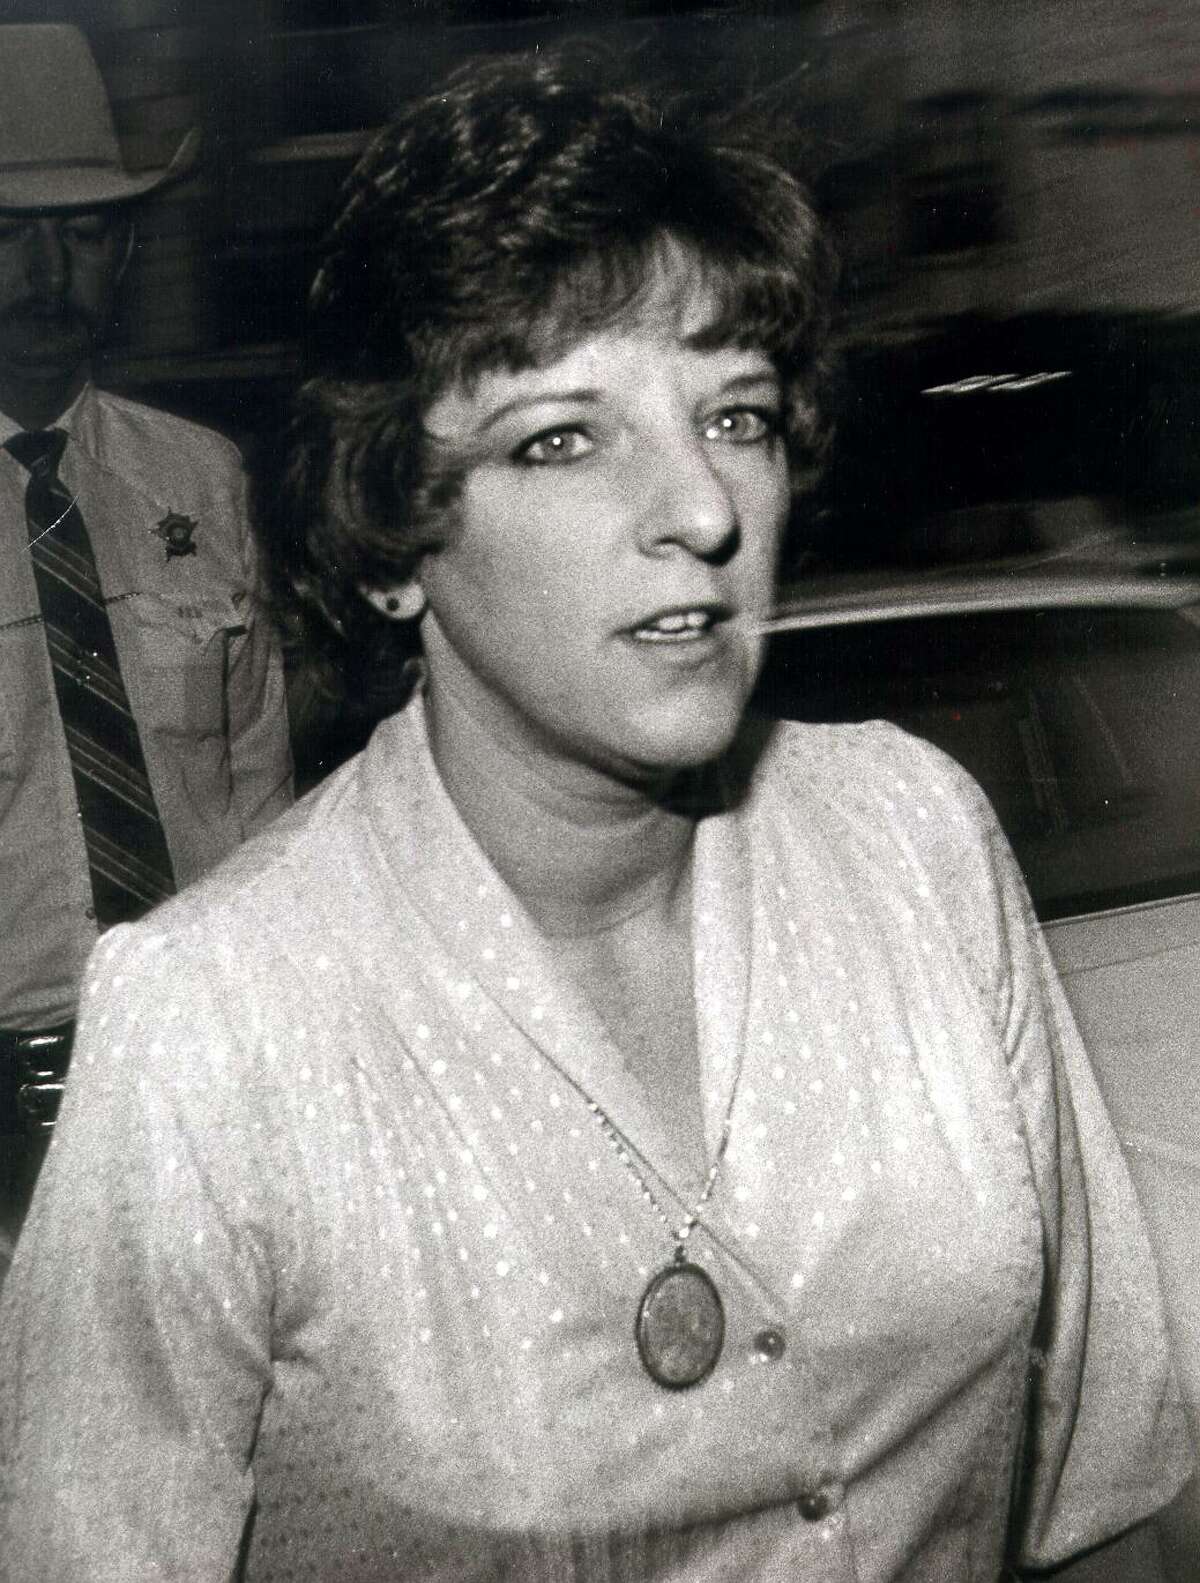 Genene Jones arrives at the courthouse in Georgetown, north of Austin, on Jan. 16, 1984. Jones, then a pediatric nurse working in San Antonio and Kerrville, was convicted in 1984 of killing 15-month-old Chelsea McClellan. In 2018, she was charged with murder in five other children’s deaths.